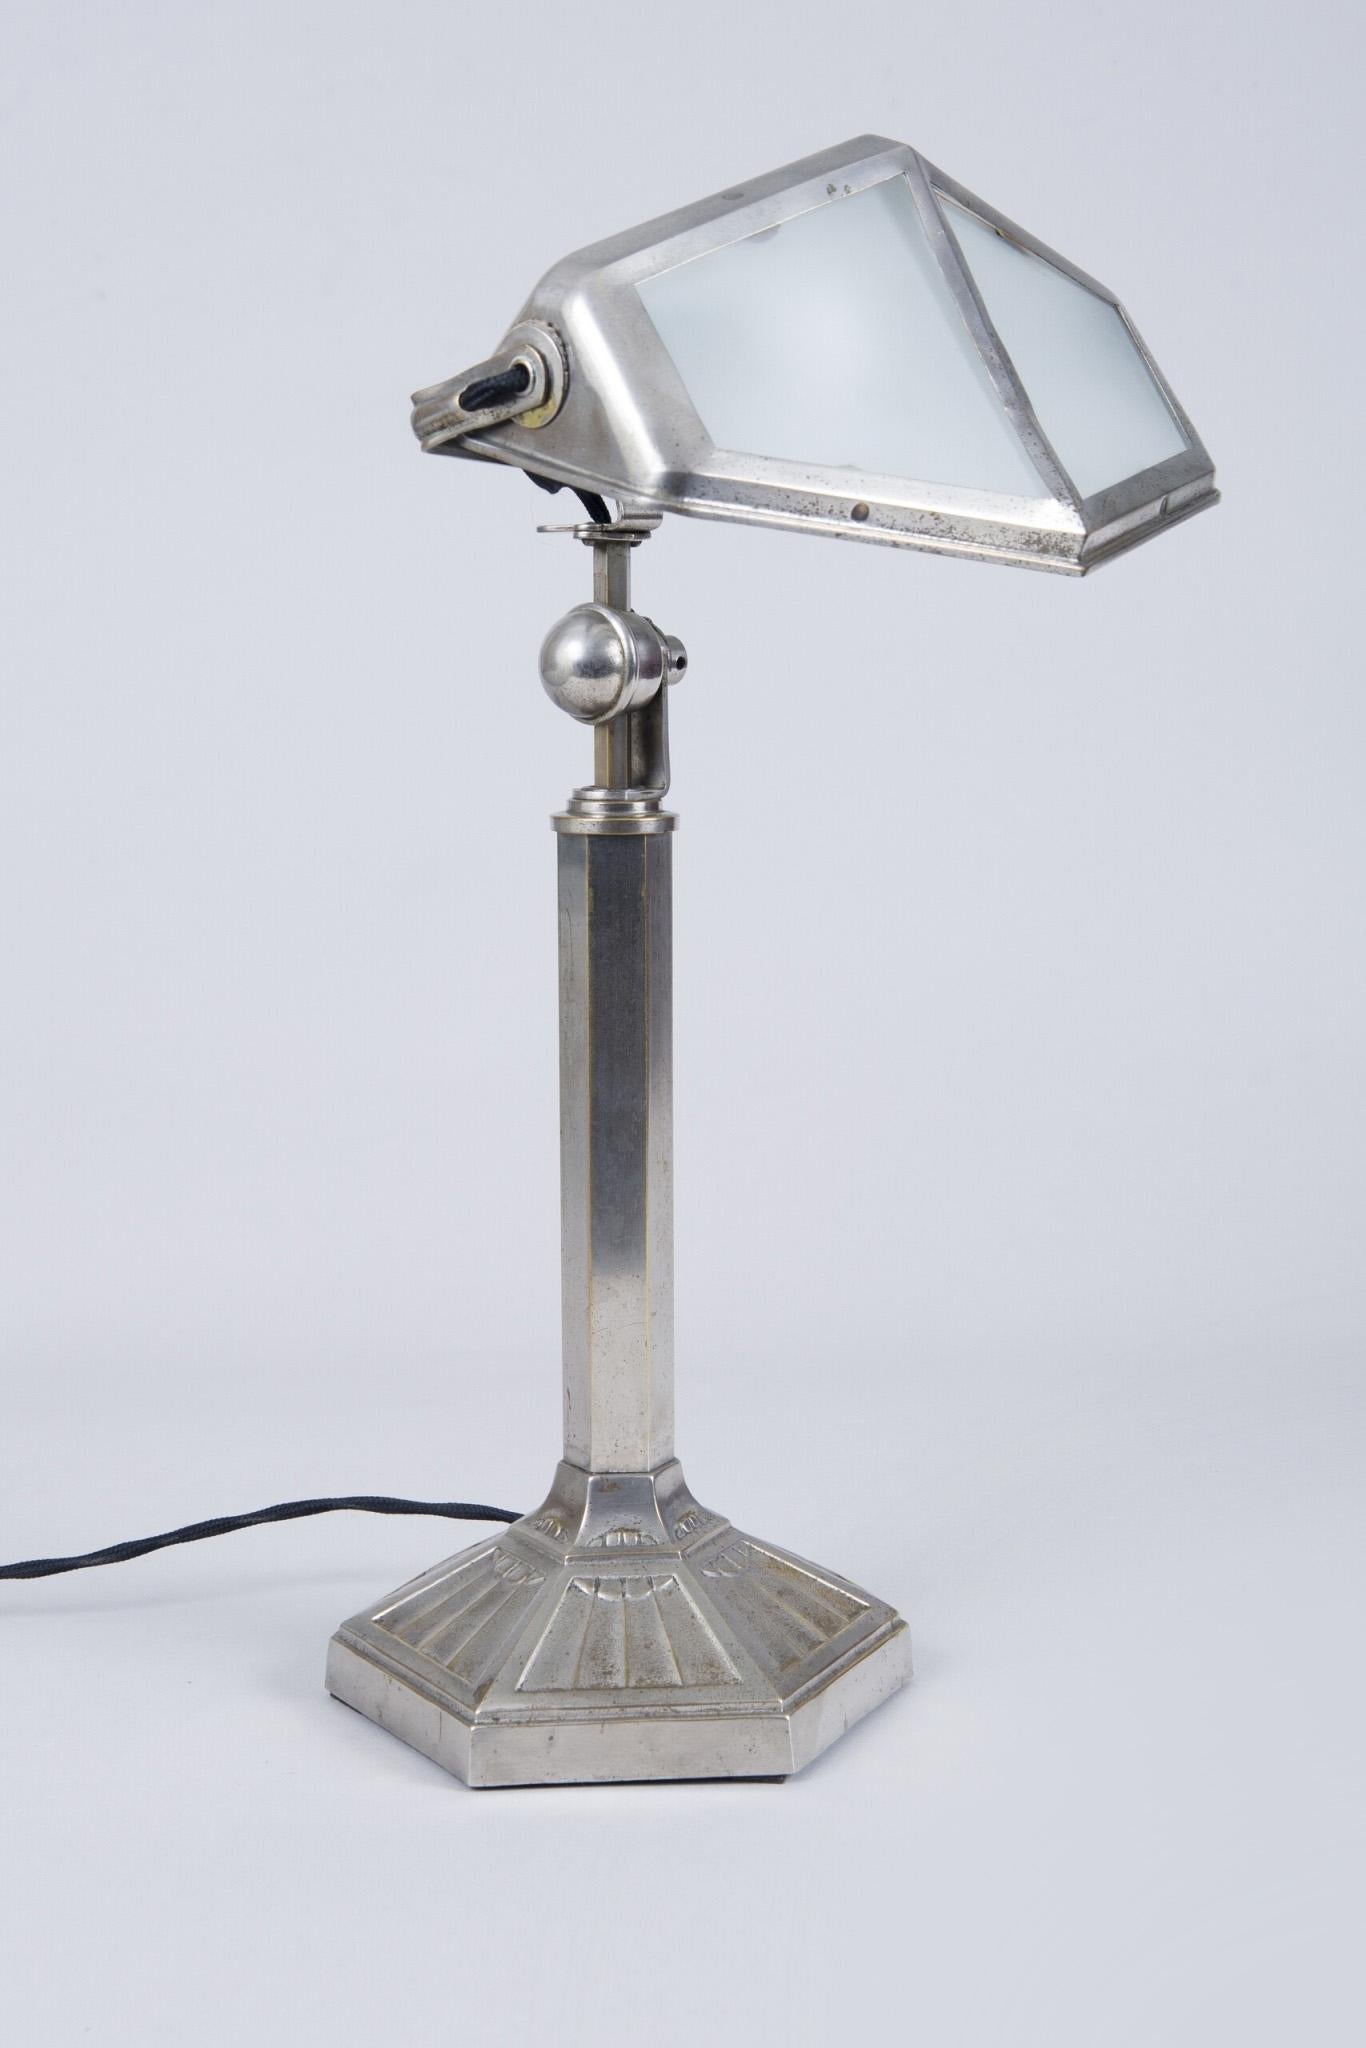 French lamp 20th century, original condition, Period 1920-1929


We guarantee safe a the cheapest air transport from Europe to the whole world within 7 days.
The price is the same as for ship transport but delivery time is really shorter.
We